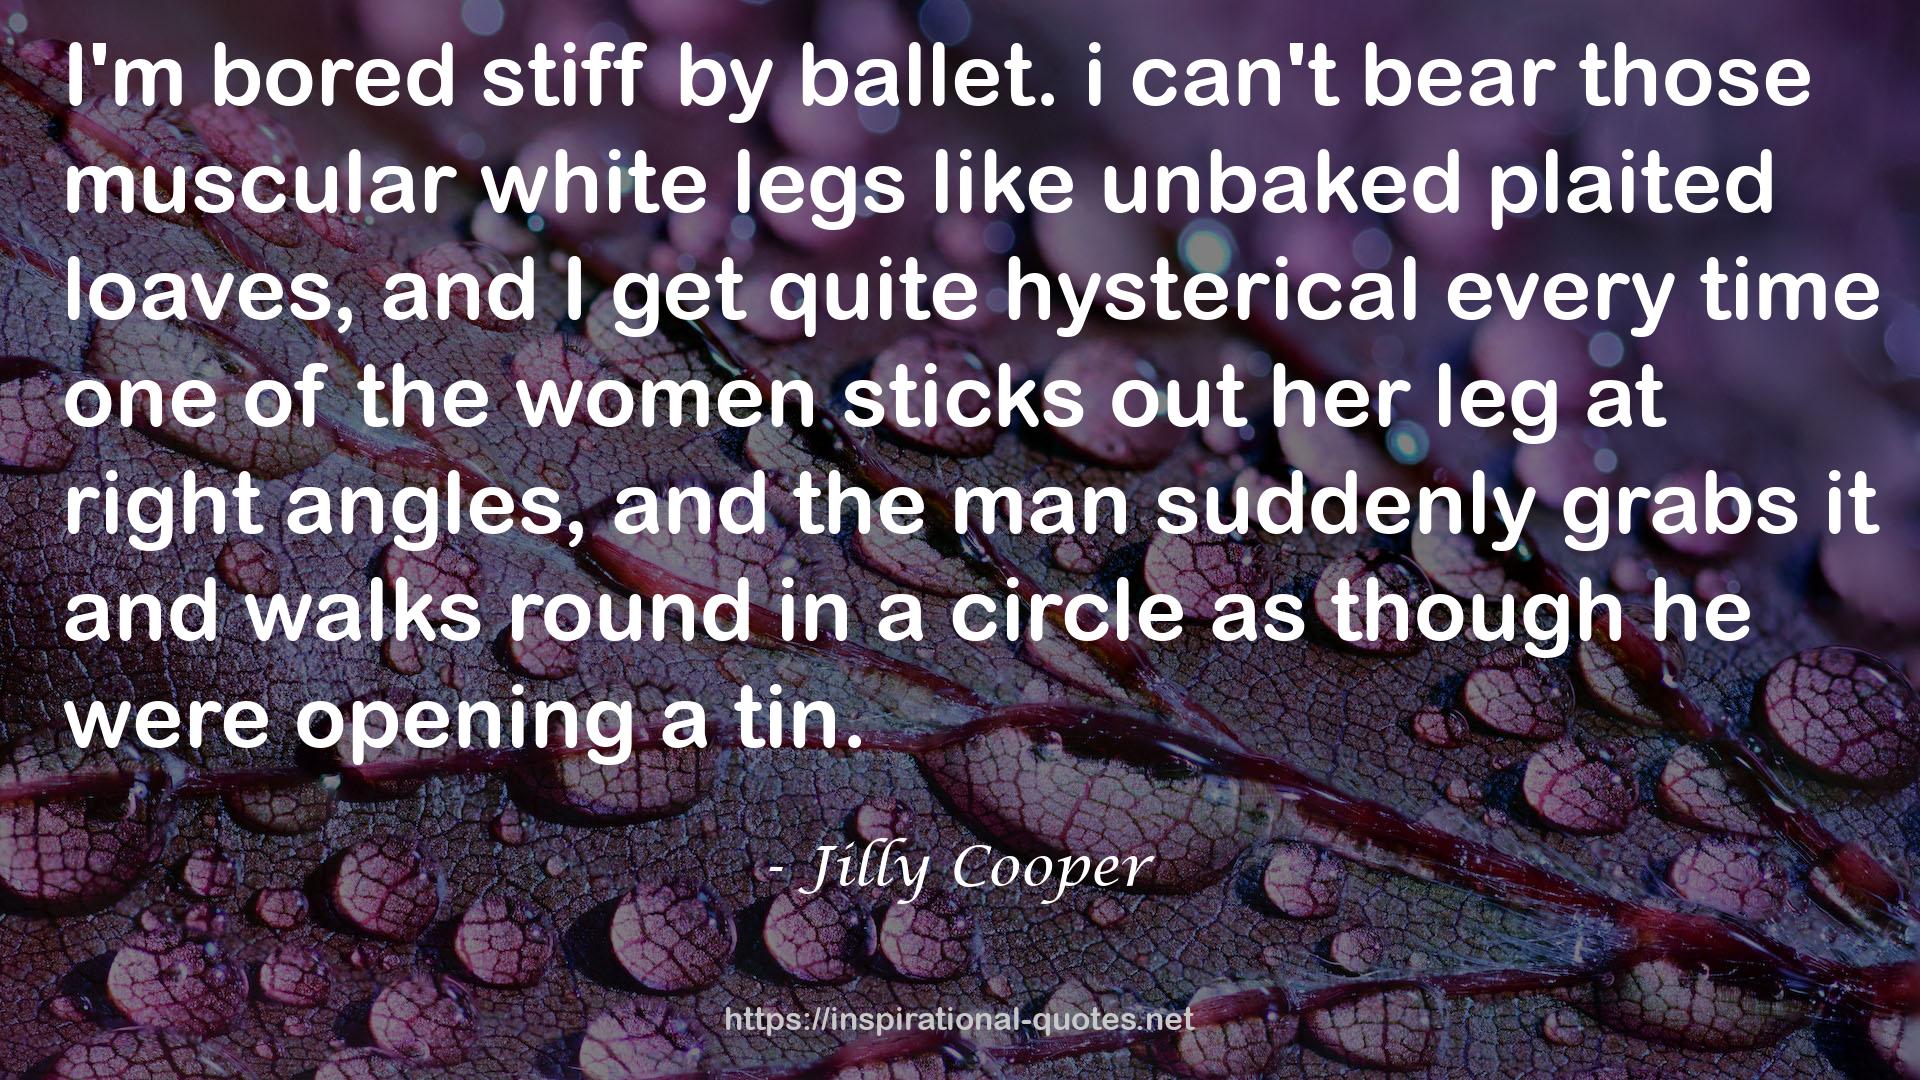 Jilly Cooper QUOTES